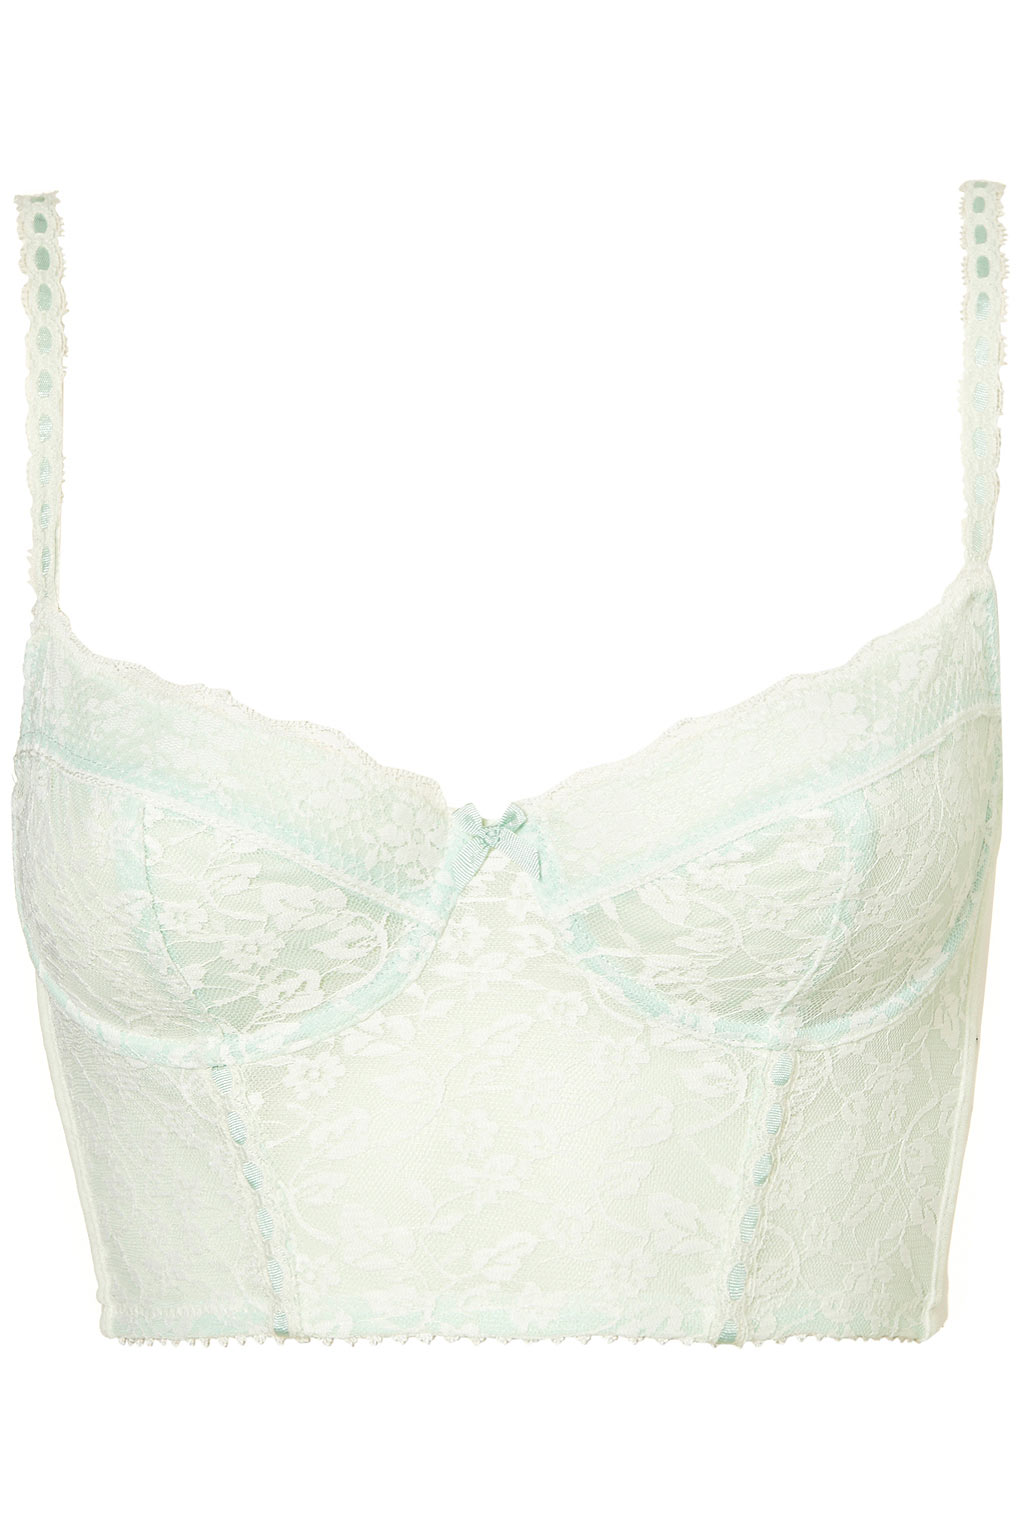 Lyst - Topshop Mint Leafy Lace Bralet in Green